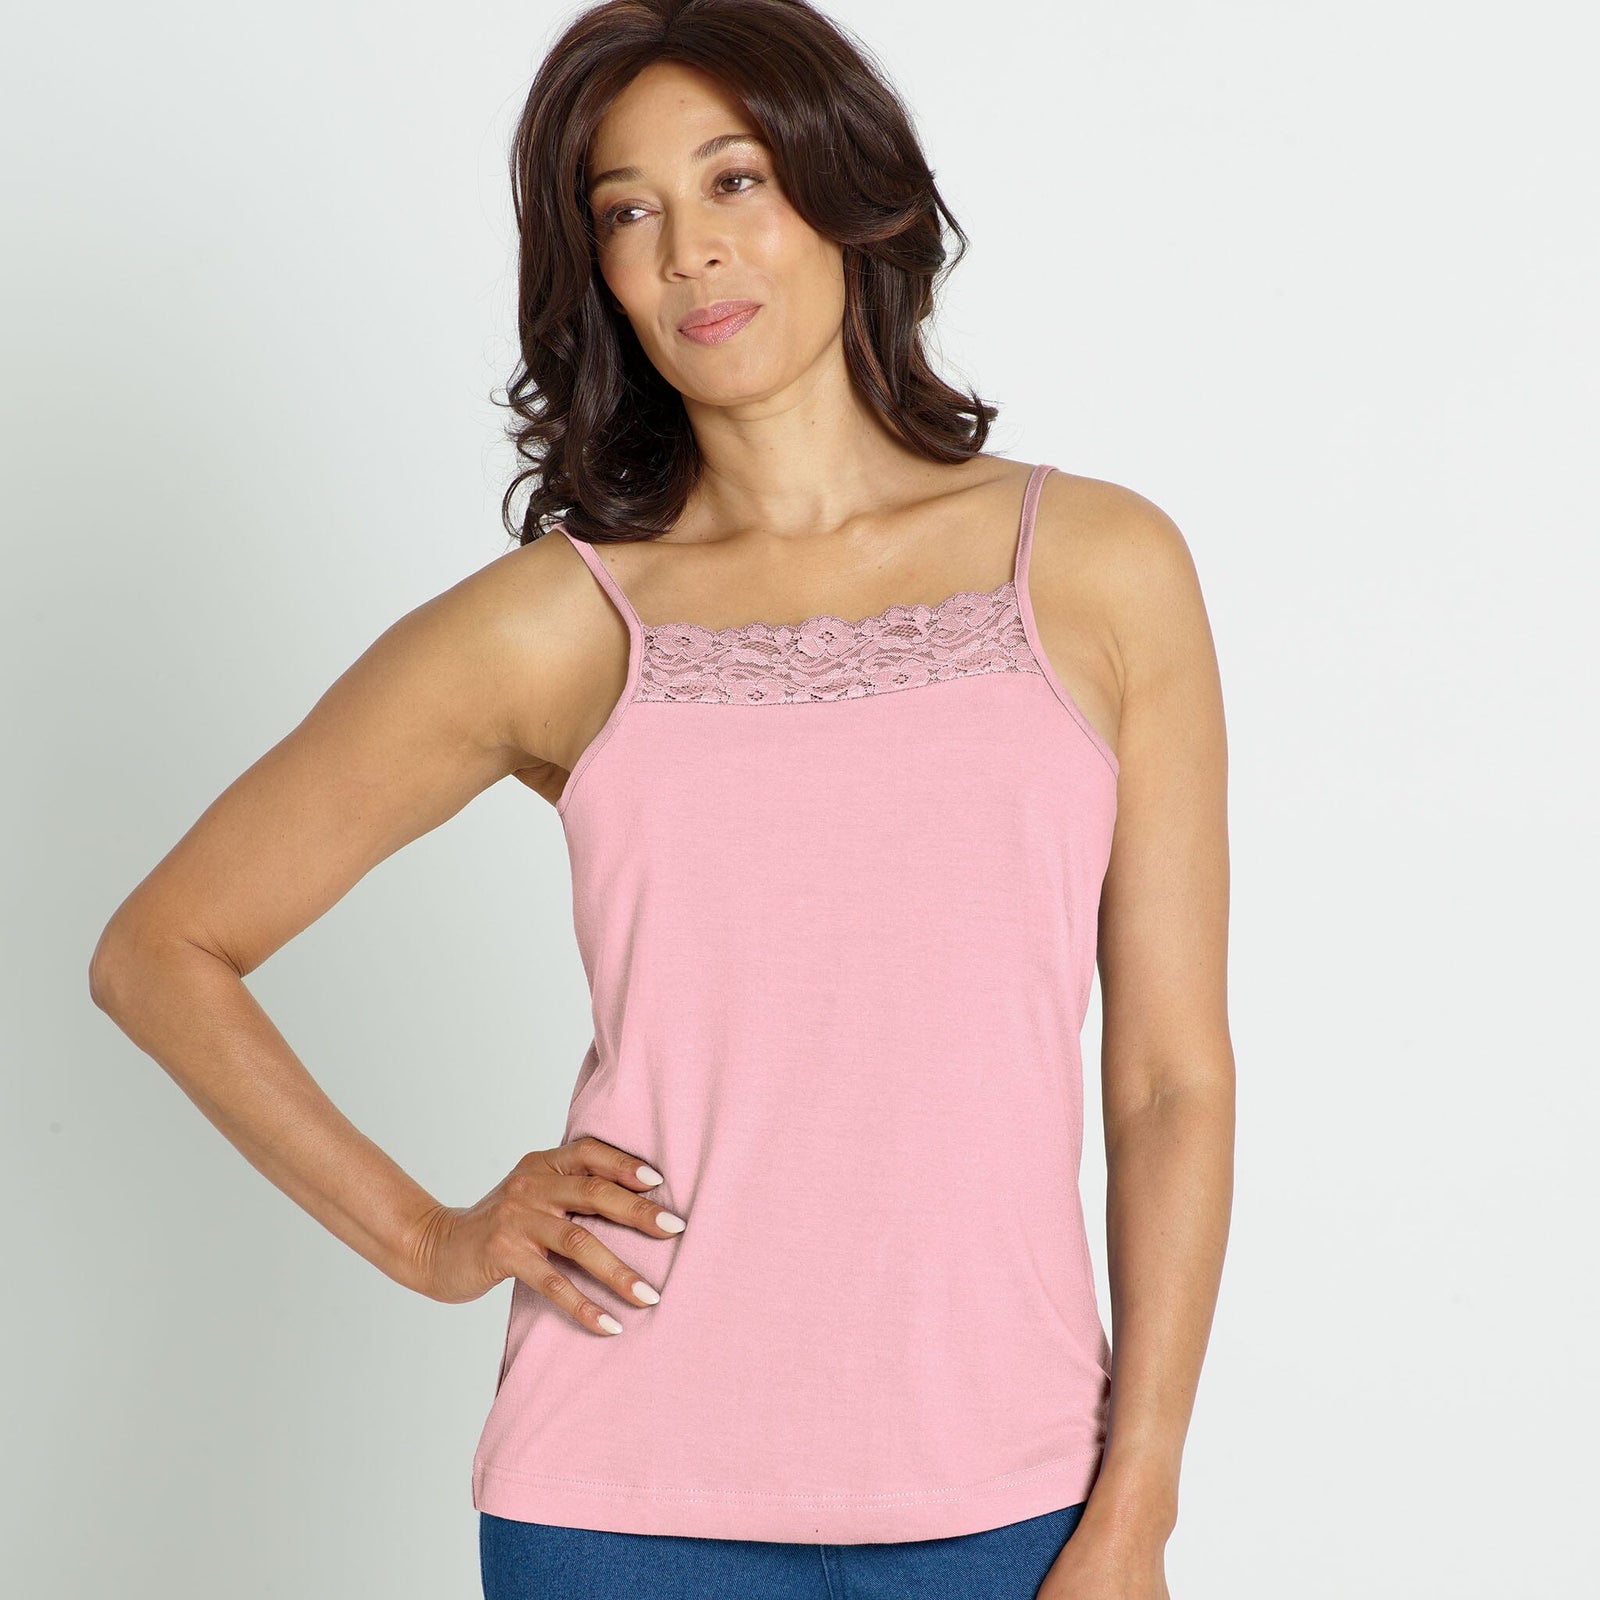 Mastectomy Post-Surgery Camisole 'Jennifer' with soft puffs in